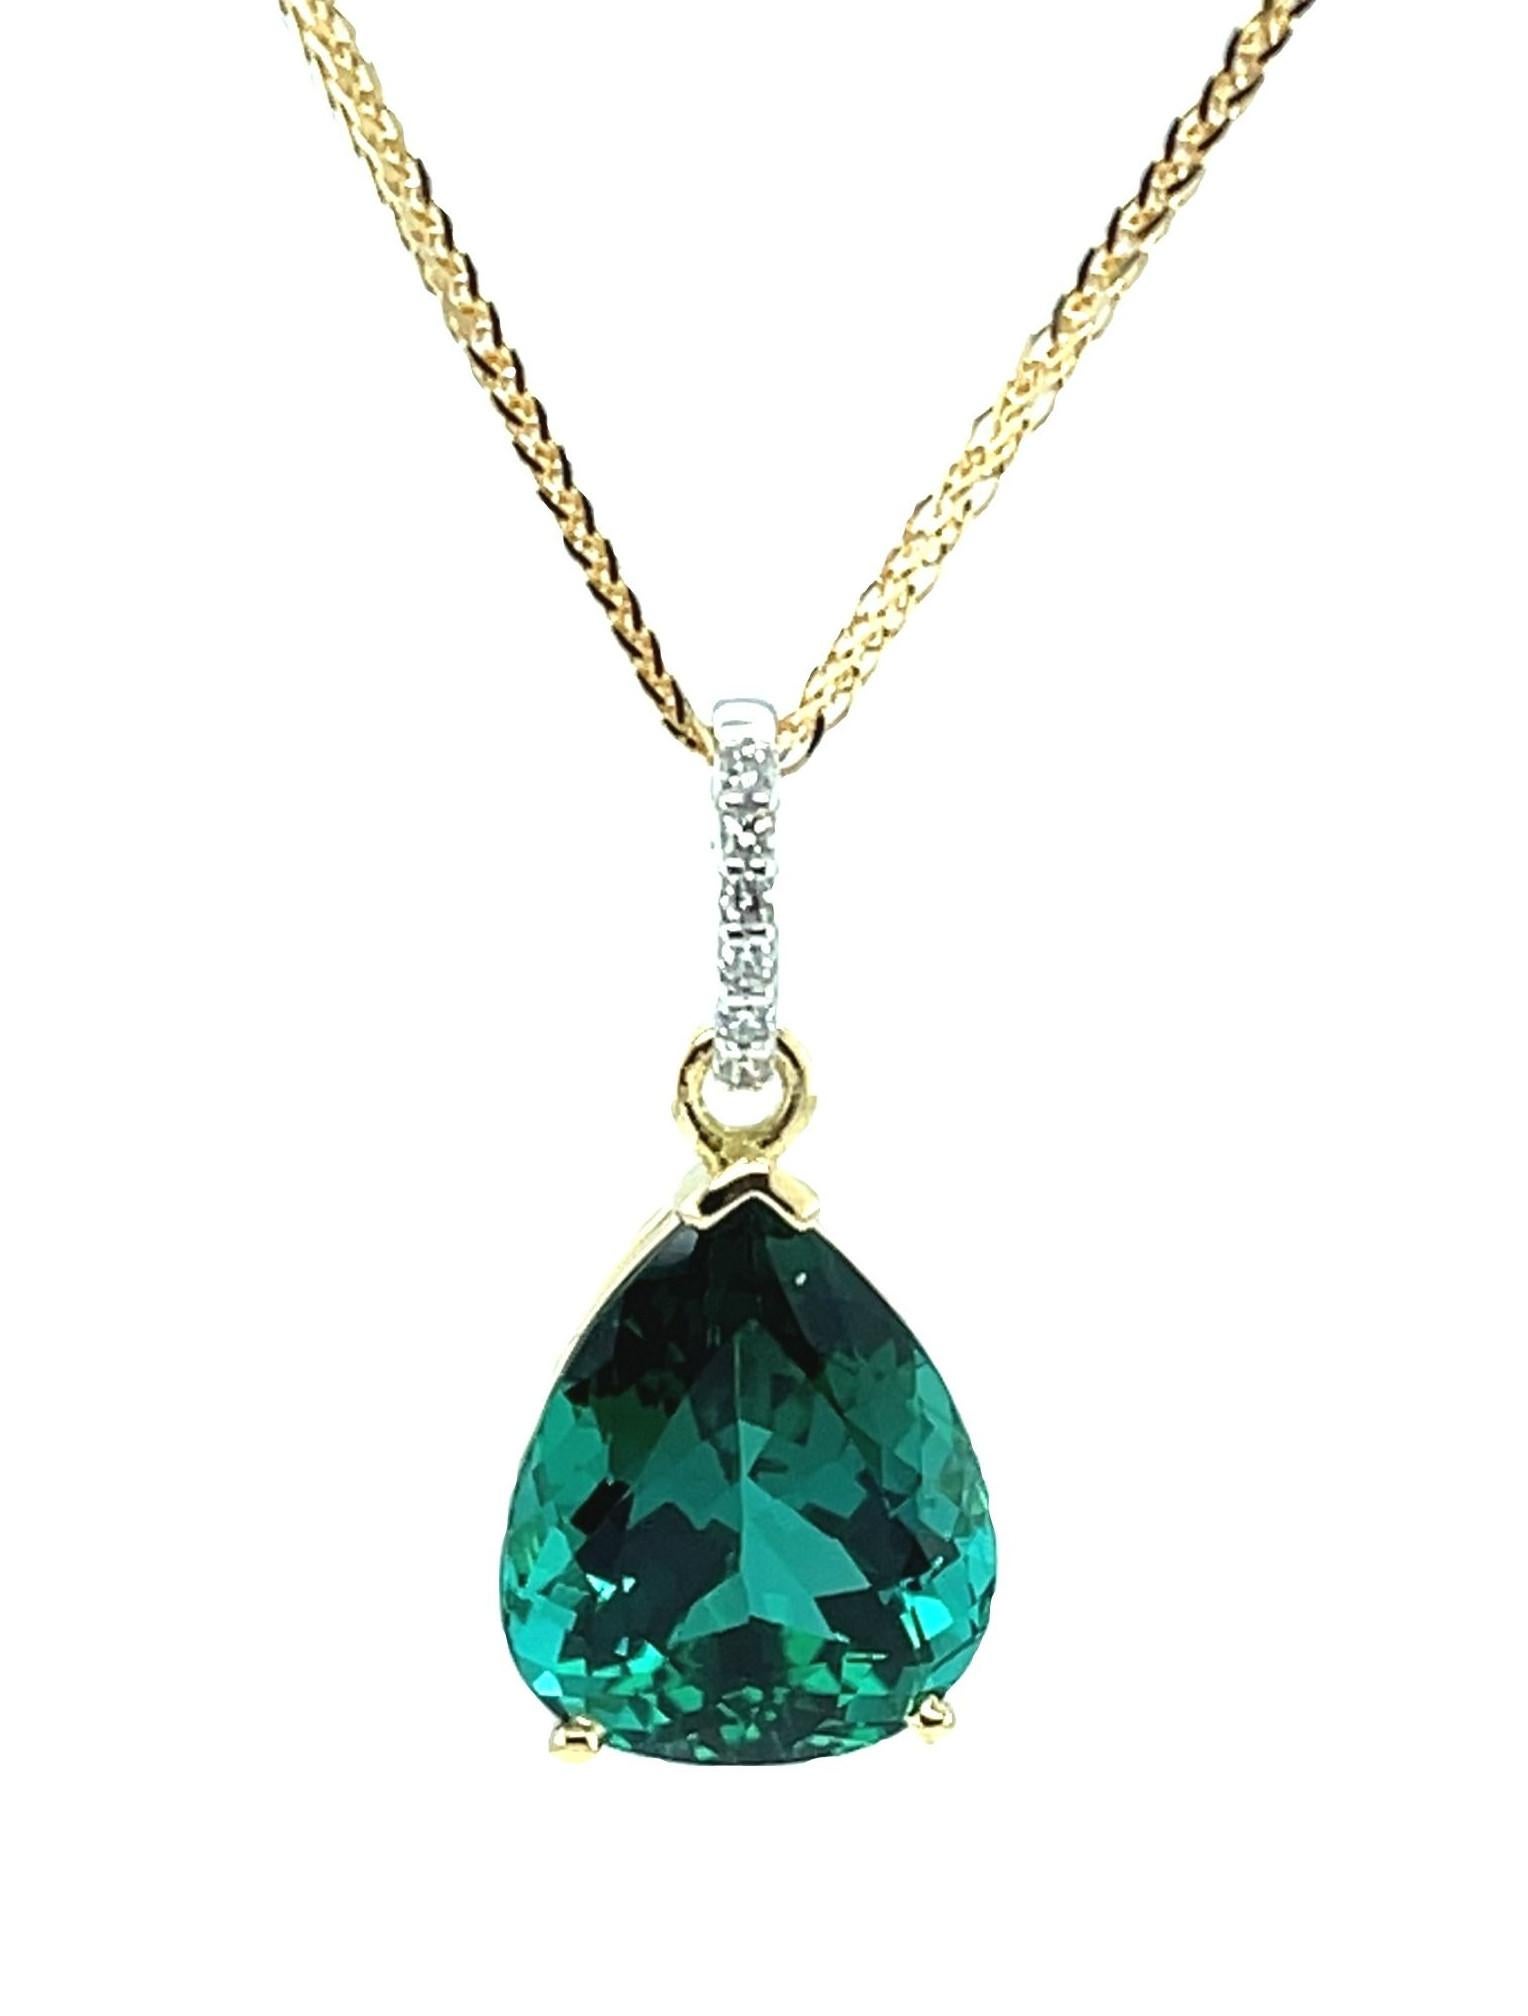 Women's or Men's Indicolite Tourmaline and Diamond Pendant Necklace in Yellow Gold, 8.14 Carats For Sale